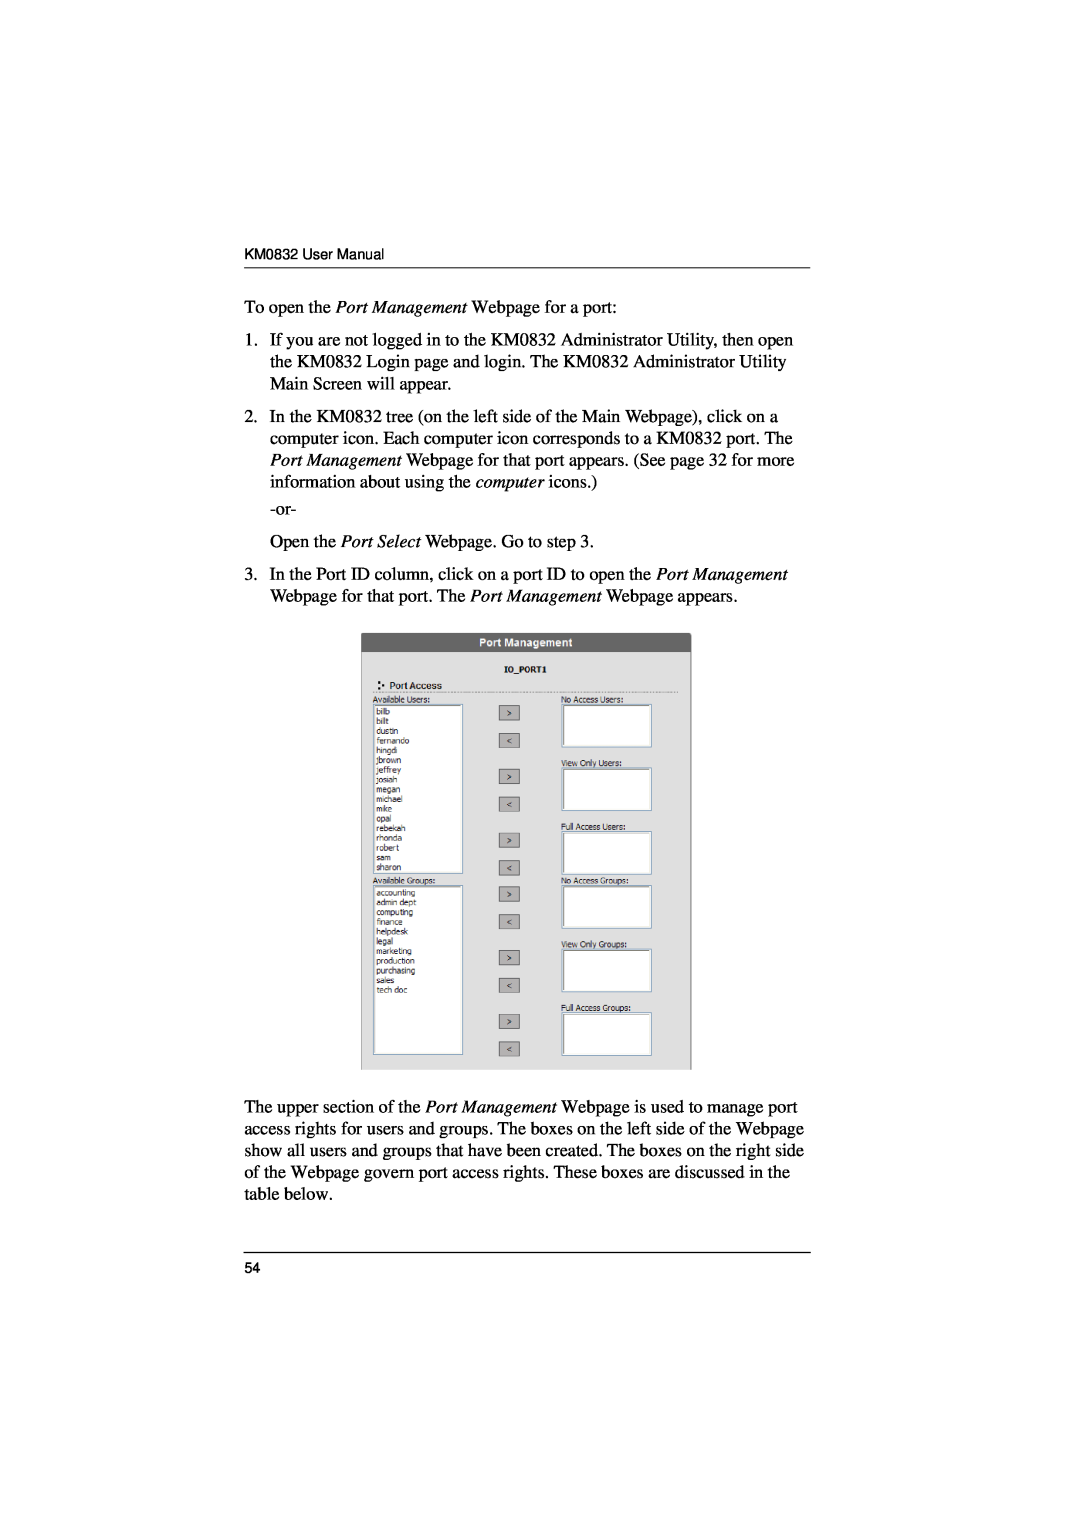 ATEN Technology KM0832 user manual To open the Port Management Webpage for a port 